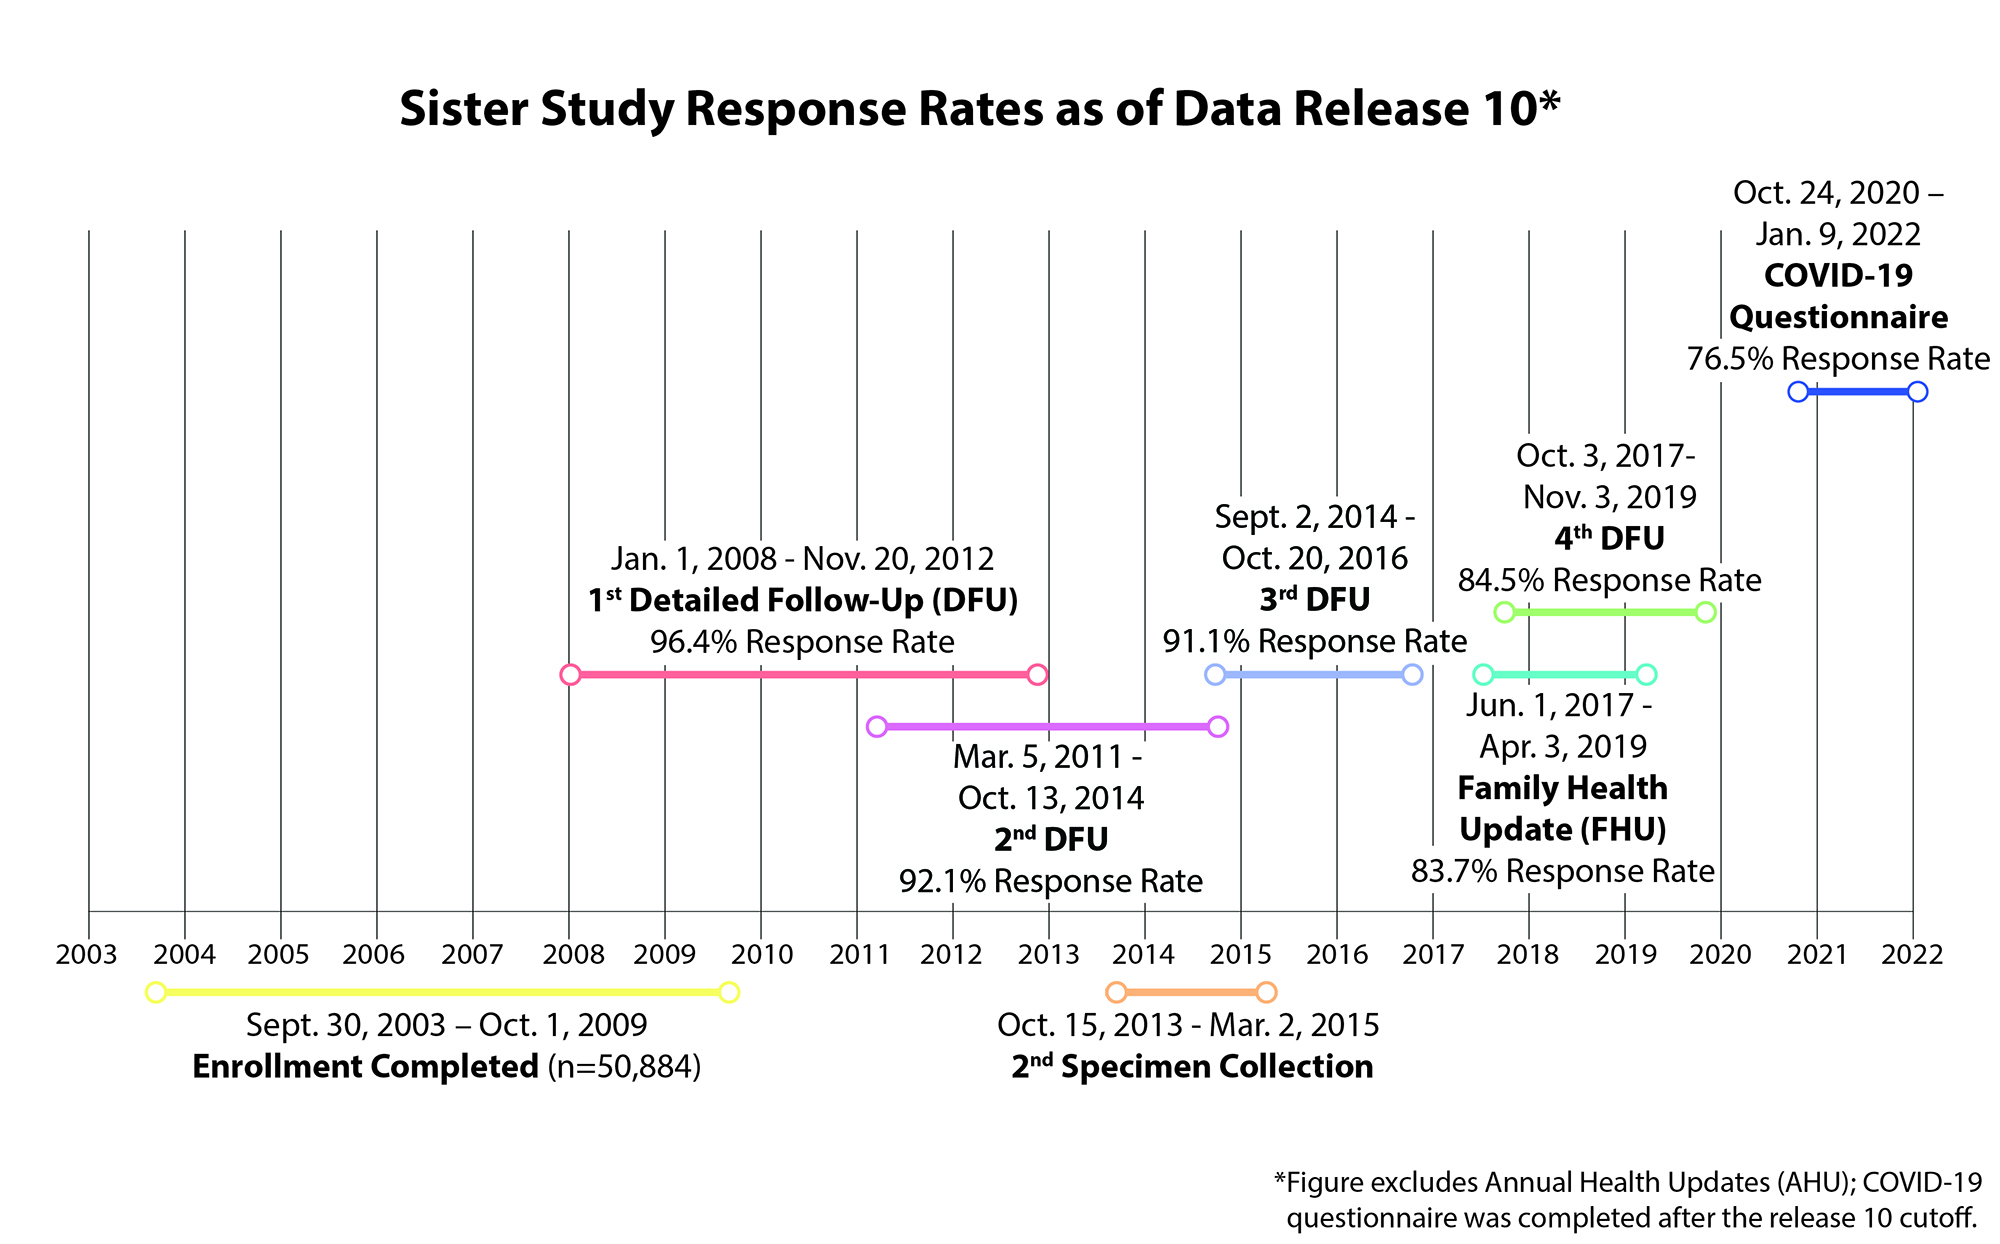 timeline image of Sister Study response rates for detailed follow-up (DFU) and family history update (FHU) as of data release 10